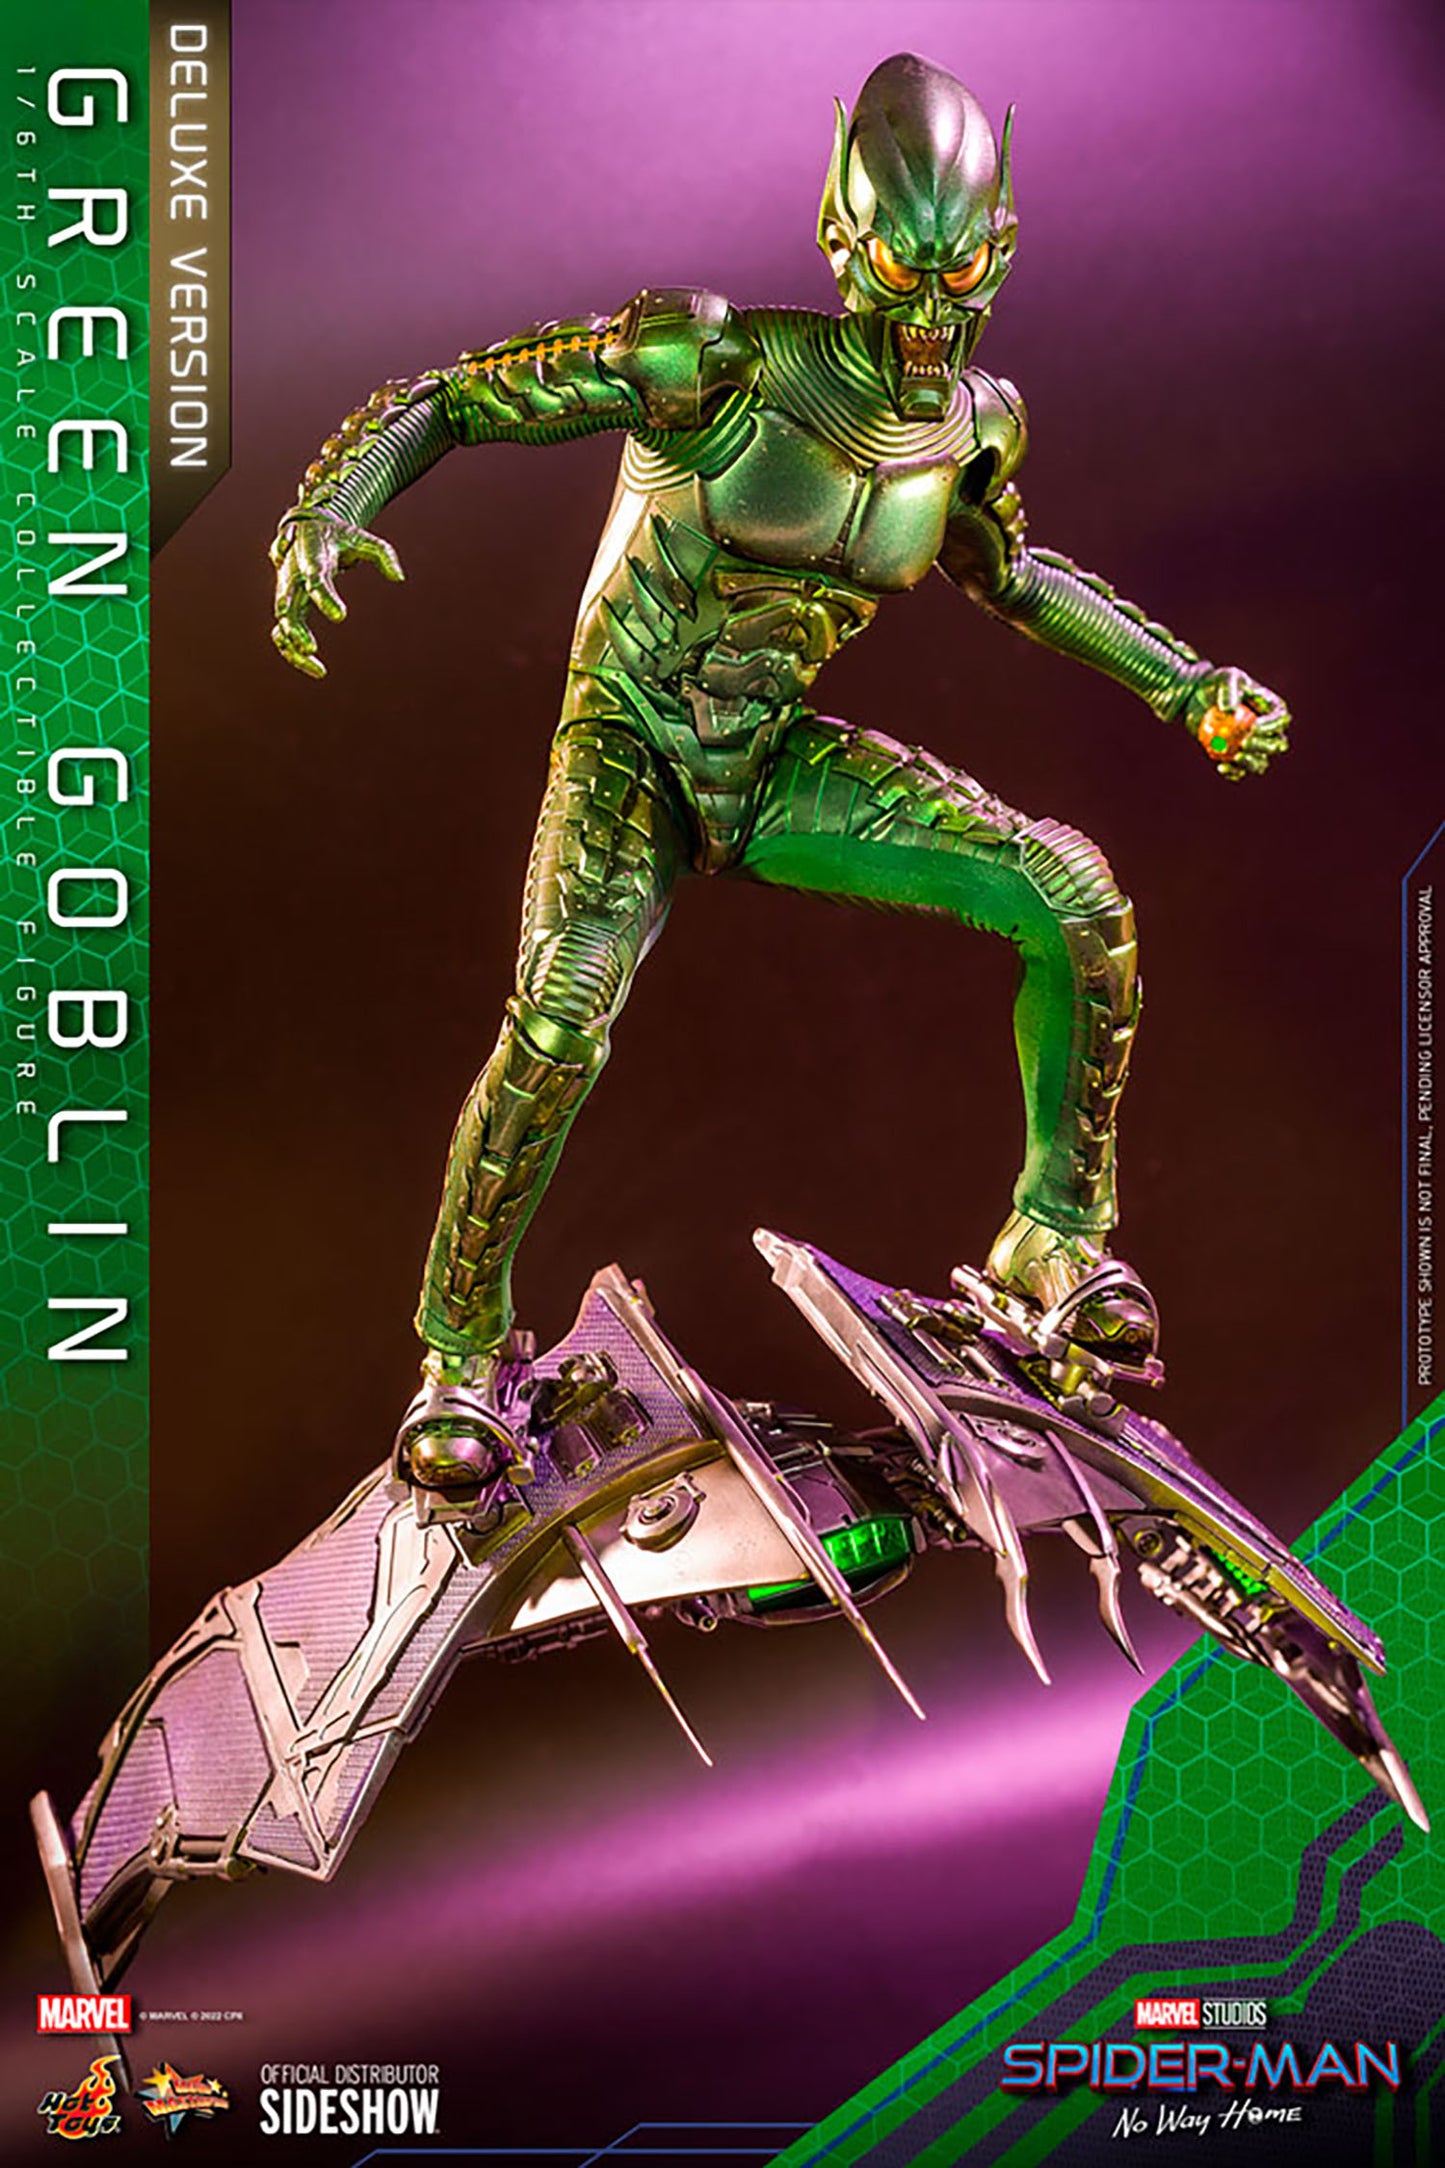 Hot Toys - Marvel - Spider-Man No Way Home - Green Goblin (Deluxe) - MMS631 - 1:6 Figure